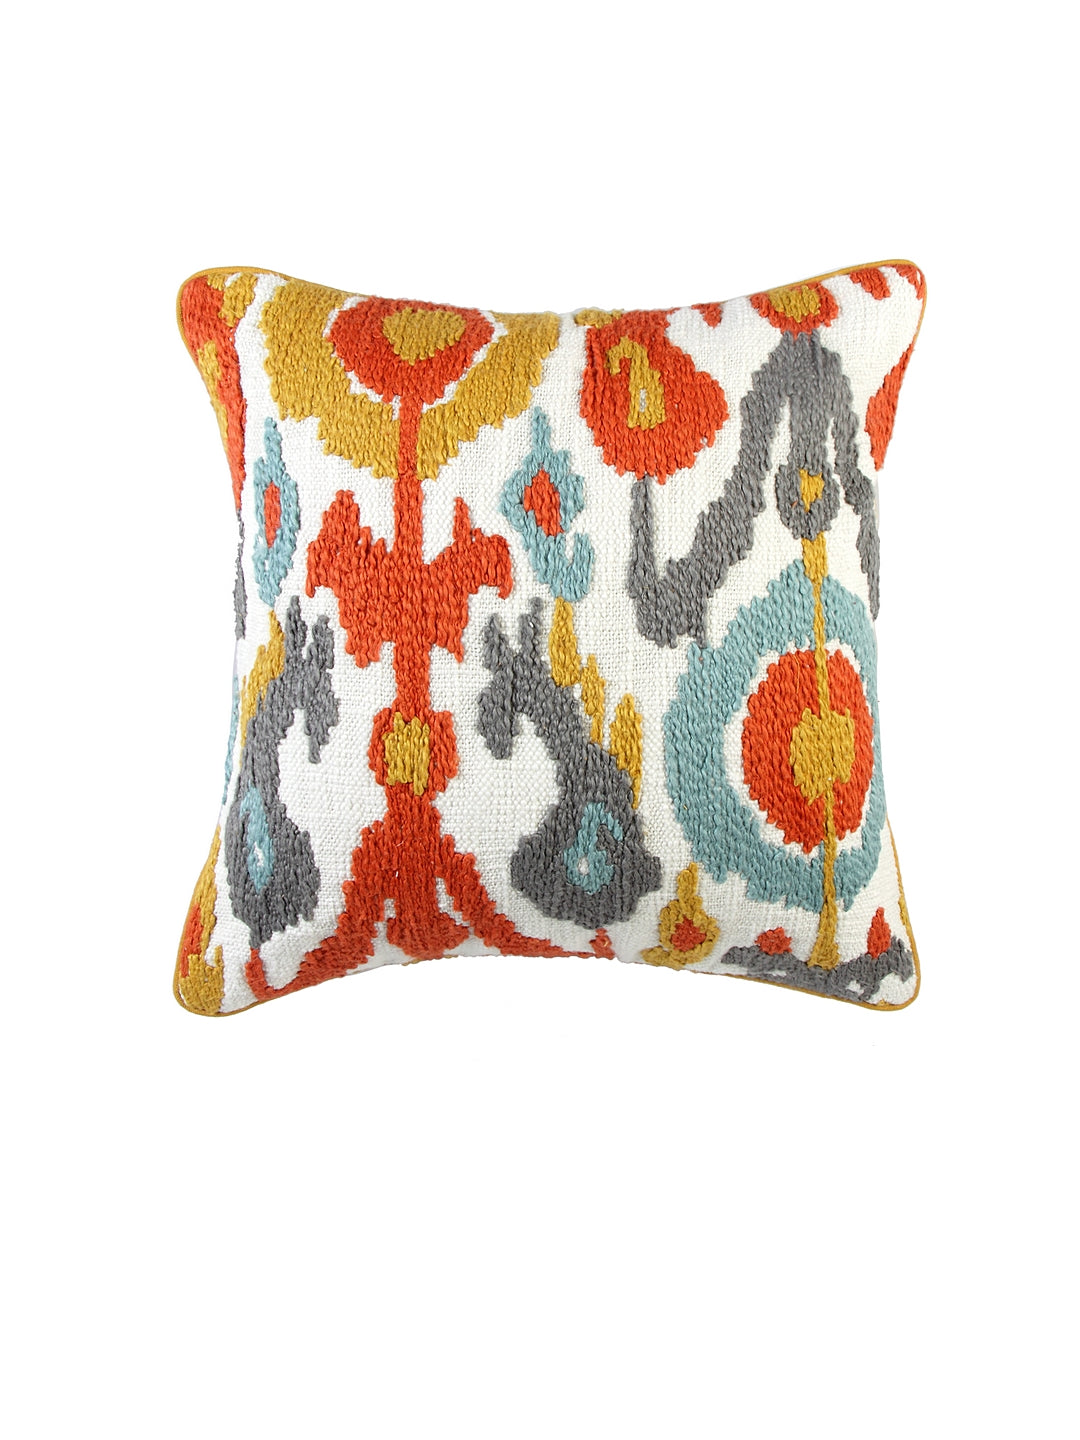 Peppy Ikat Embroidered Cushion Cover